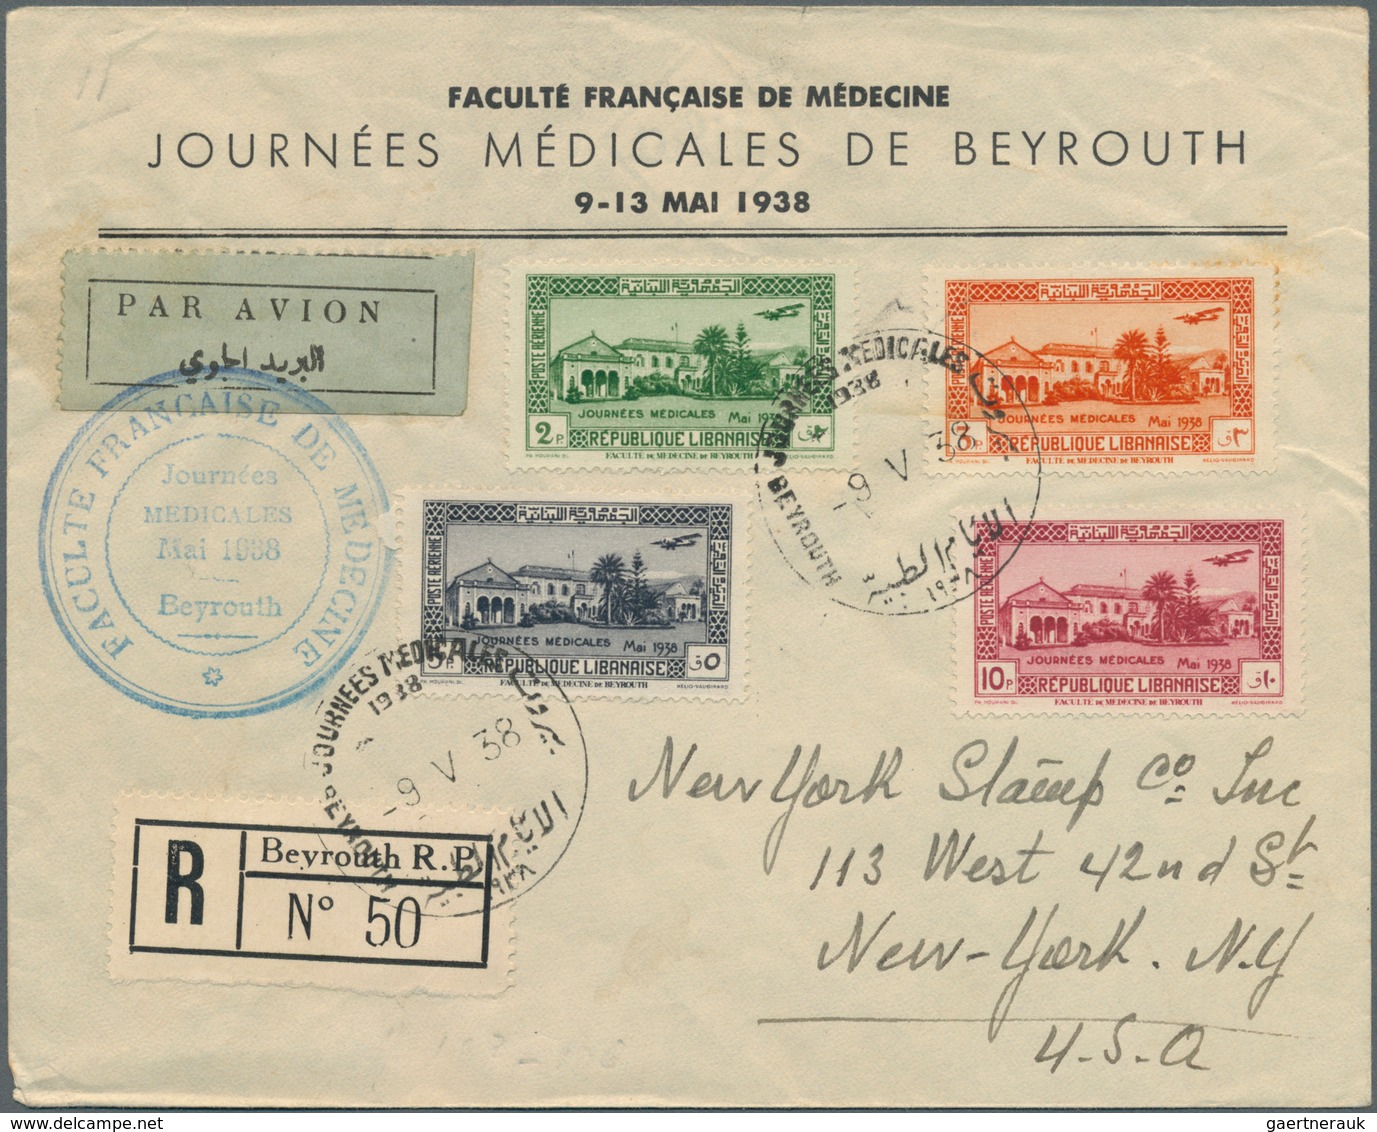 Libanon: 1881/1949: 9 commercial used or First day covers, some registered. Nice collection.